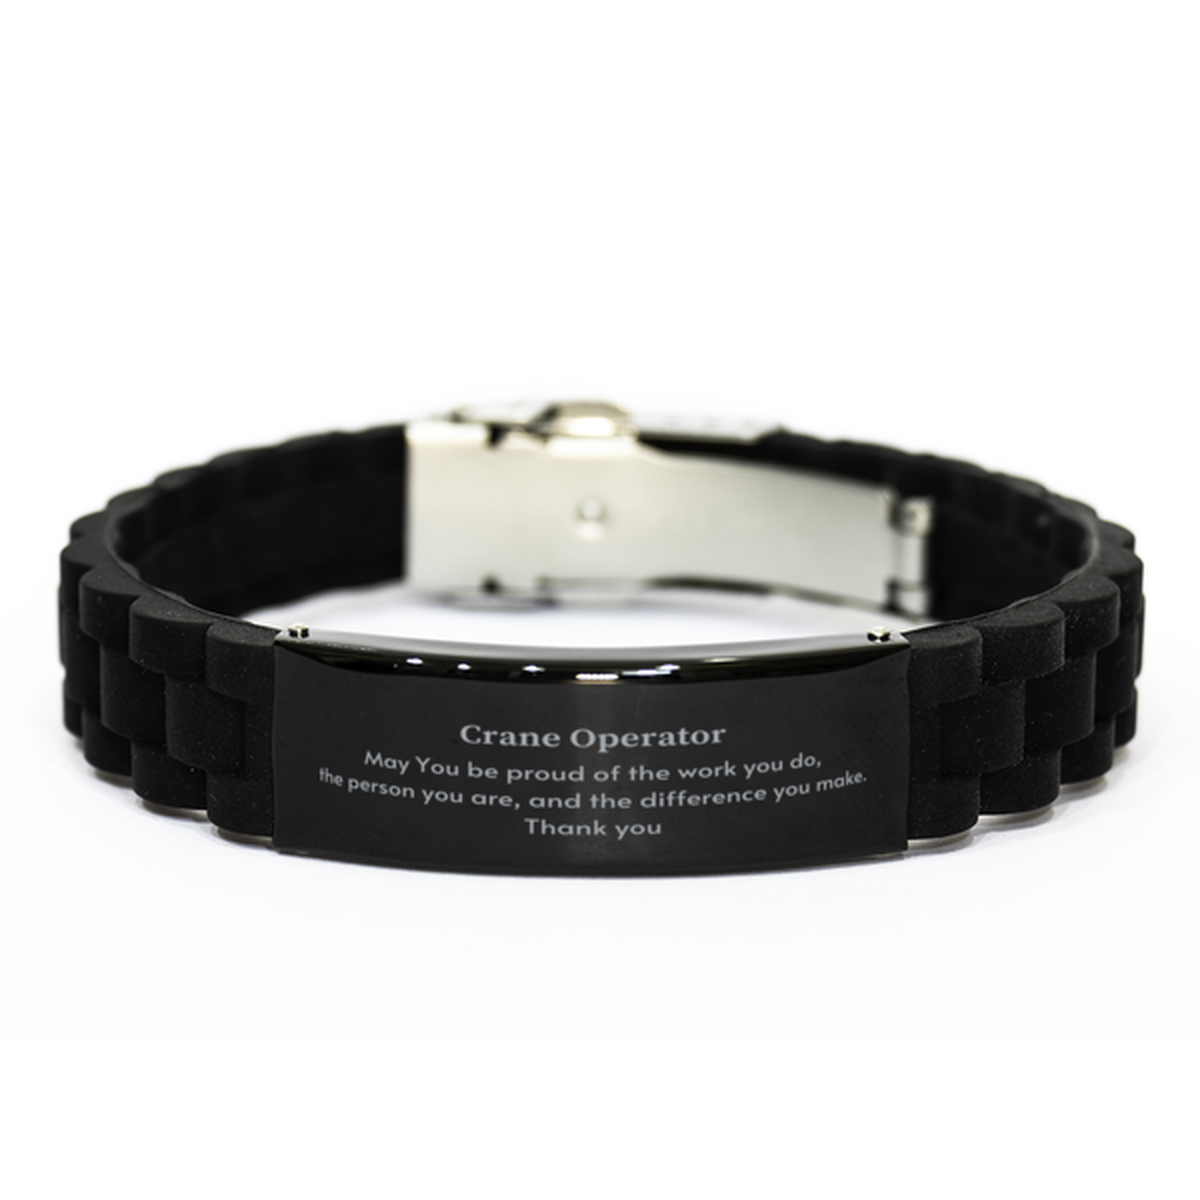 Heartwarming Black Glidelock Clasp Bracelet Retirement Coworkers Gifts for Crane Operator, Crane Operator May You be proud of the work you do, the person you are Gifts for Boss Men Women Friends